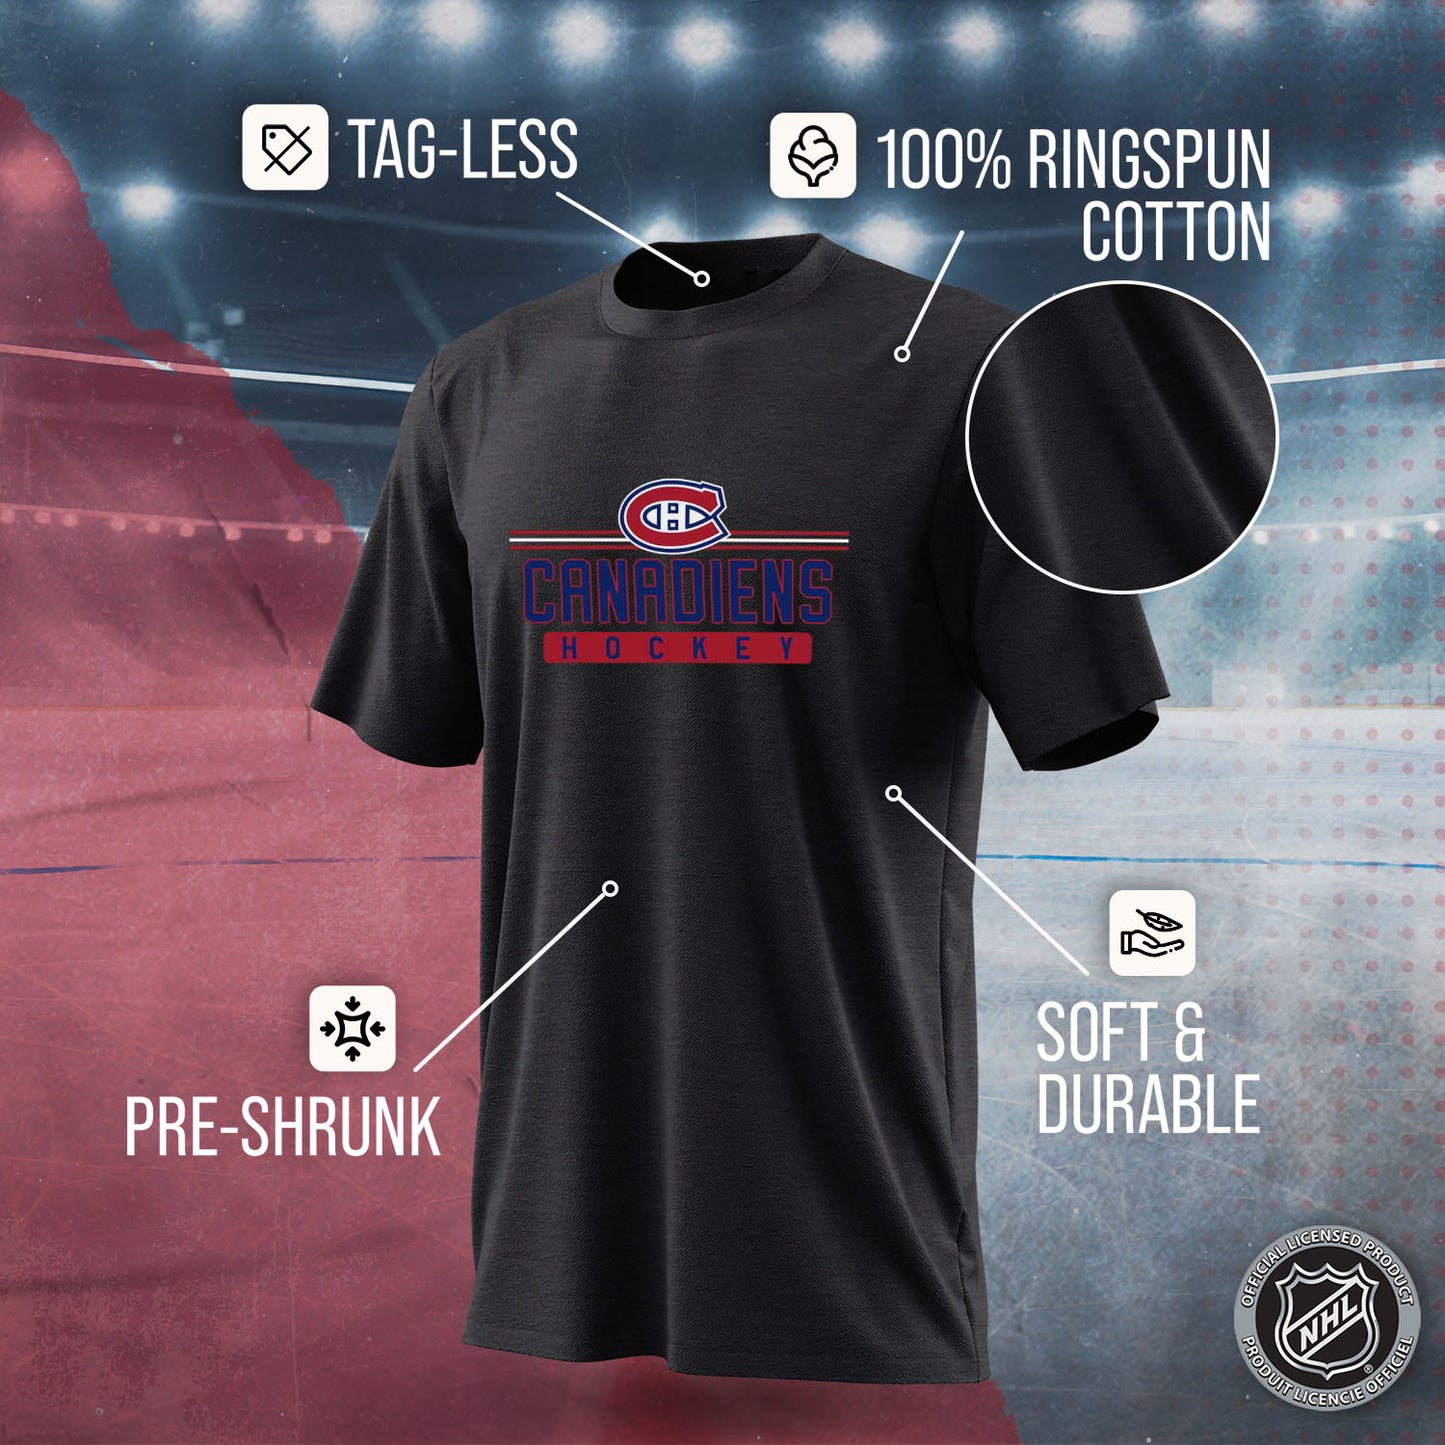 Montreal Canadiens Adult NHL Heather Charcoal True Fan Hockey T-Shirt - Charcoal